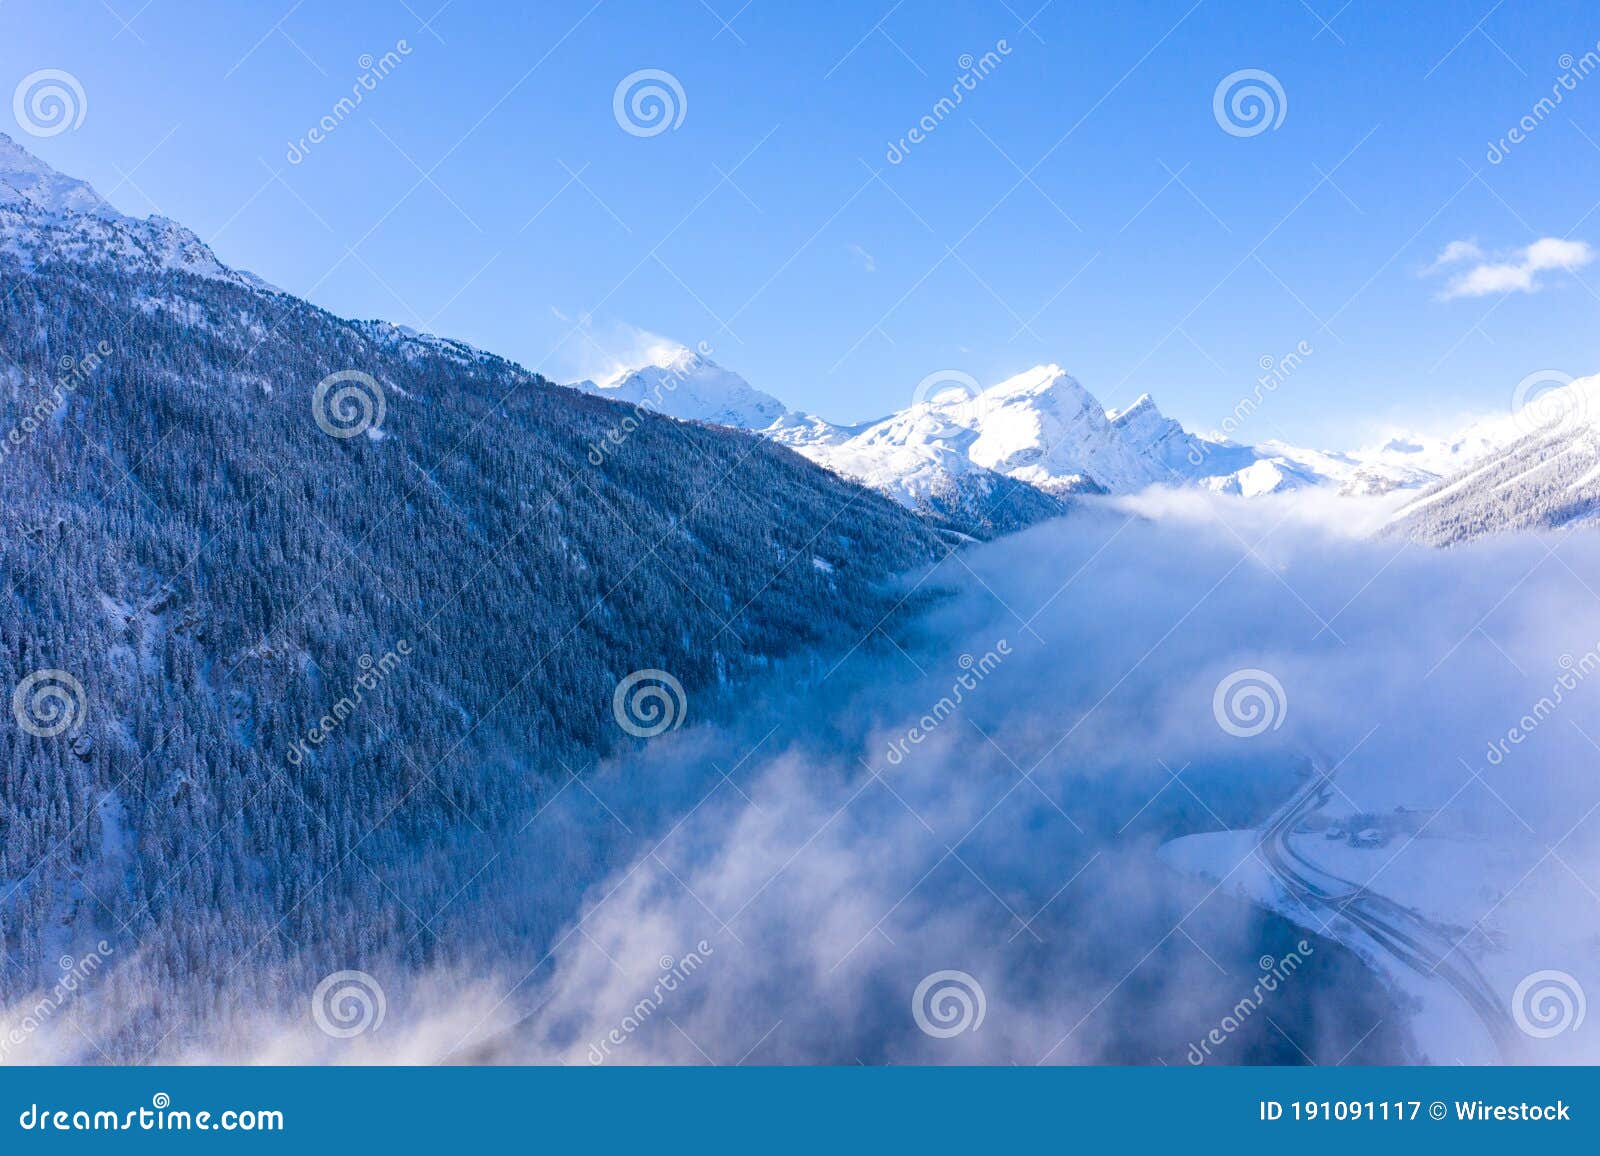 Scenic Landscape of Snow-covered Mountains in Switzerland - Perfect for  Wallpaper Stock Image - Image of scenery, switzerland: 191091117